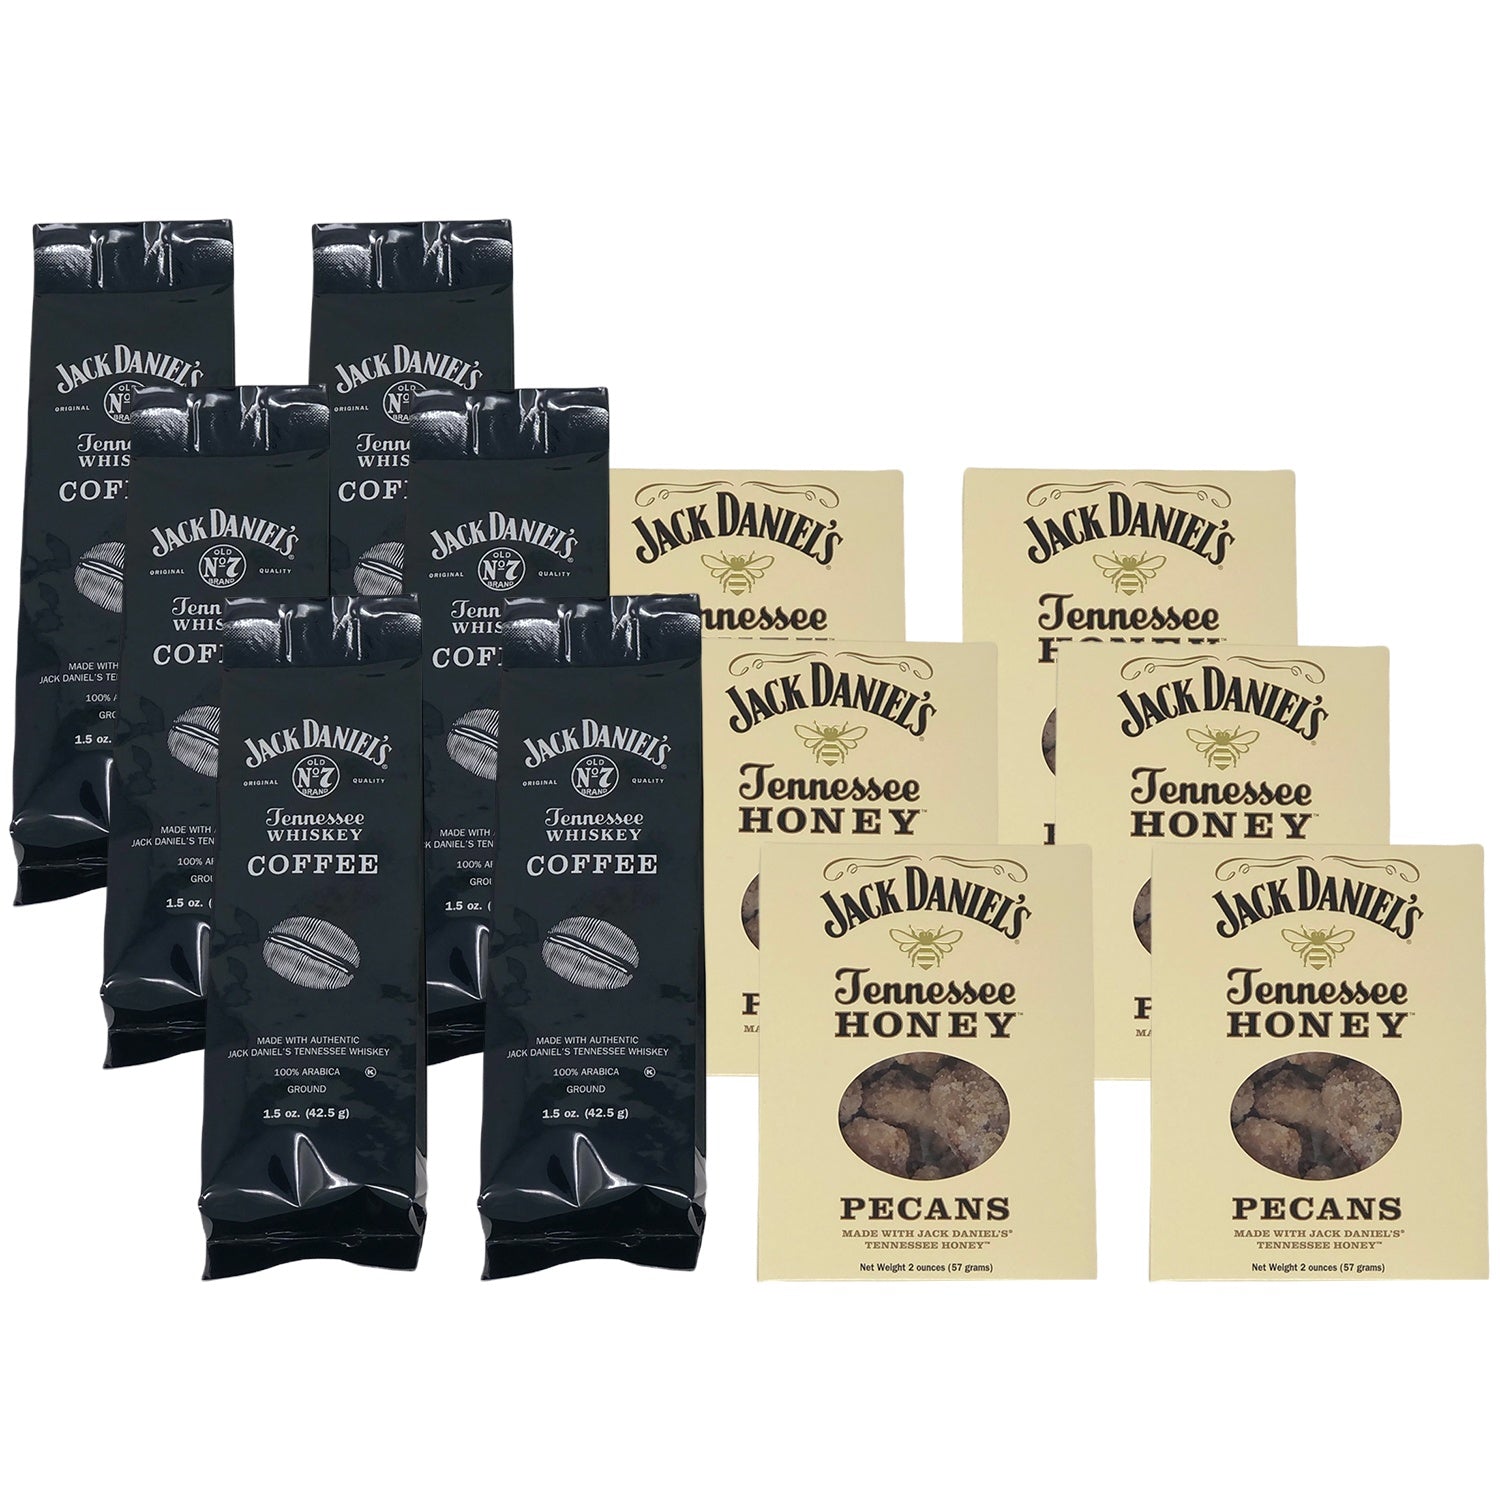 Six sets of Jack Daniel's Coffee (1.5oz) and Jack Daniel's Tennessee Honey Pecan (2oz) Duo - Party Favor Stuffer